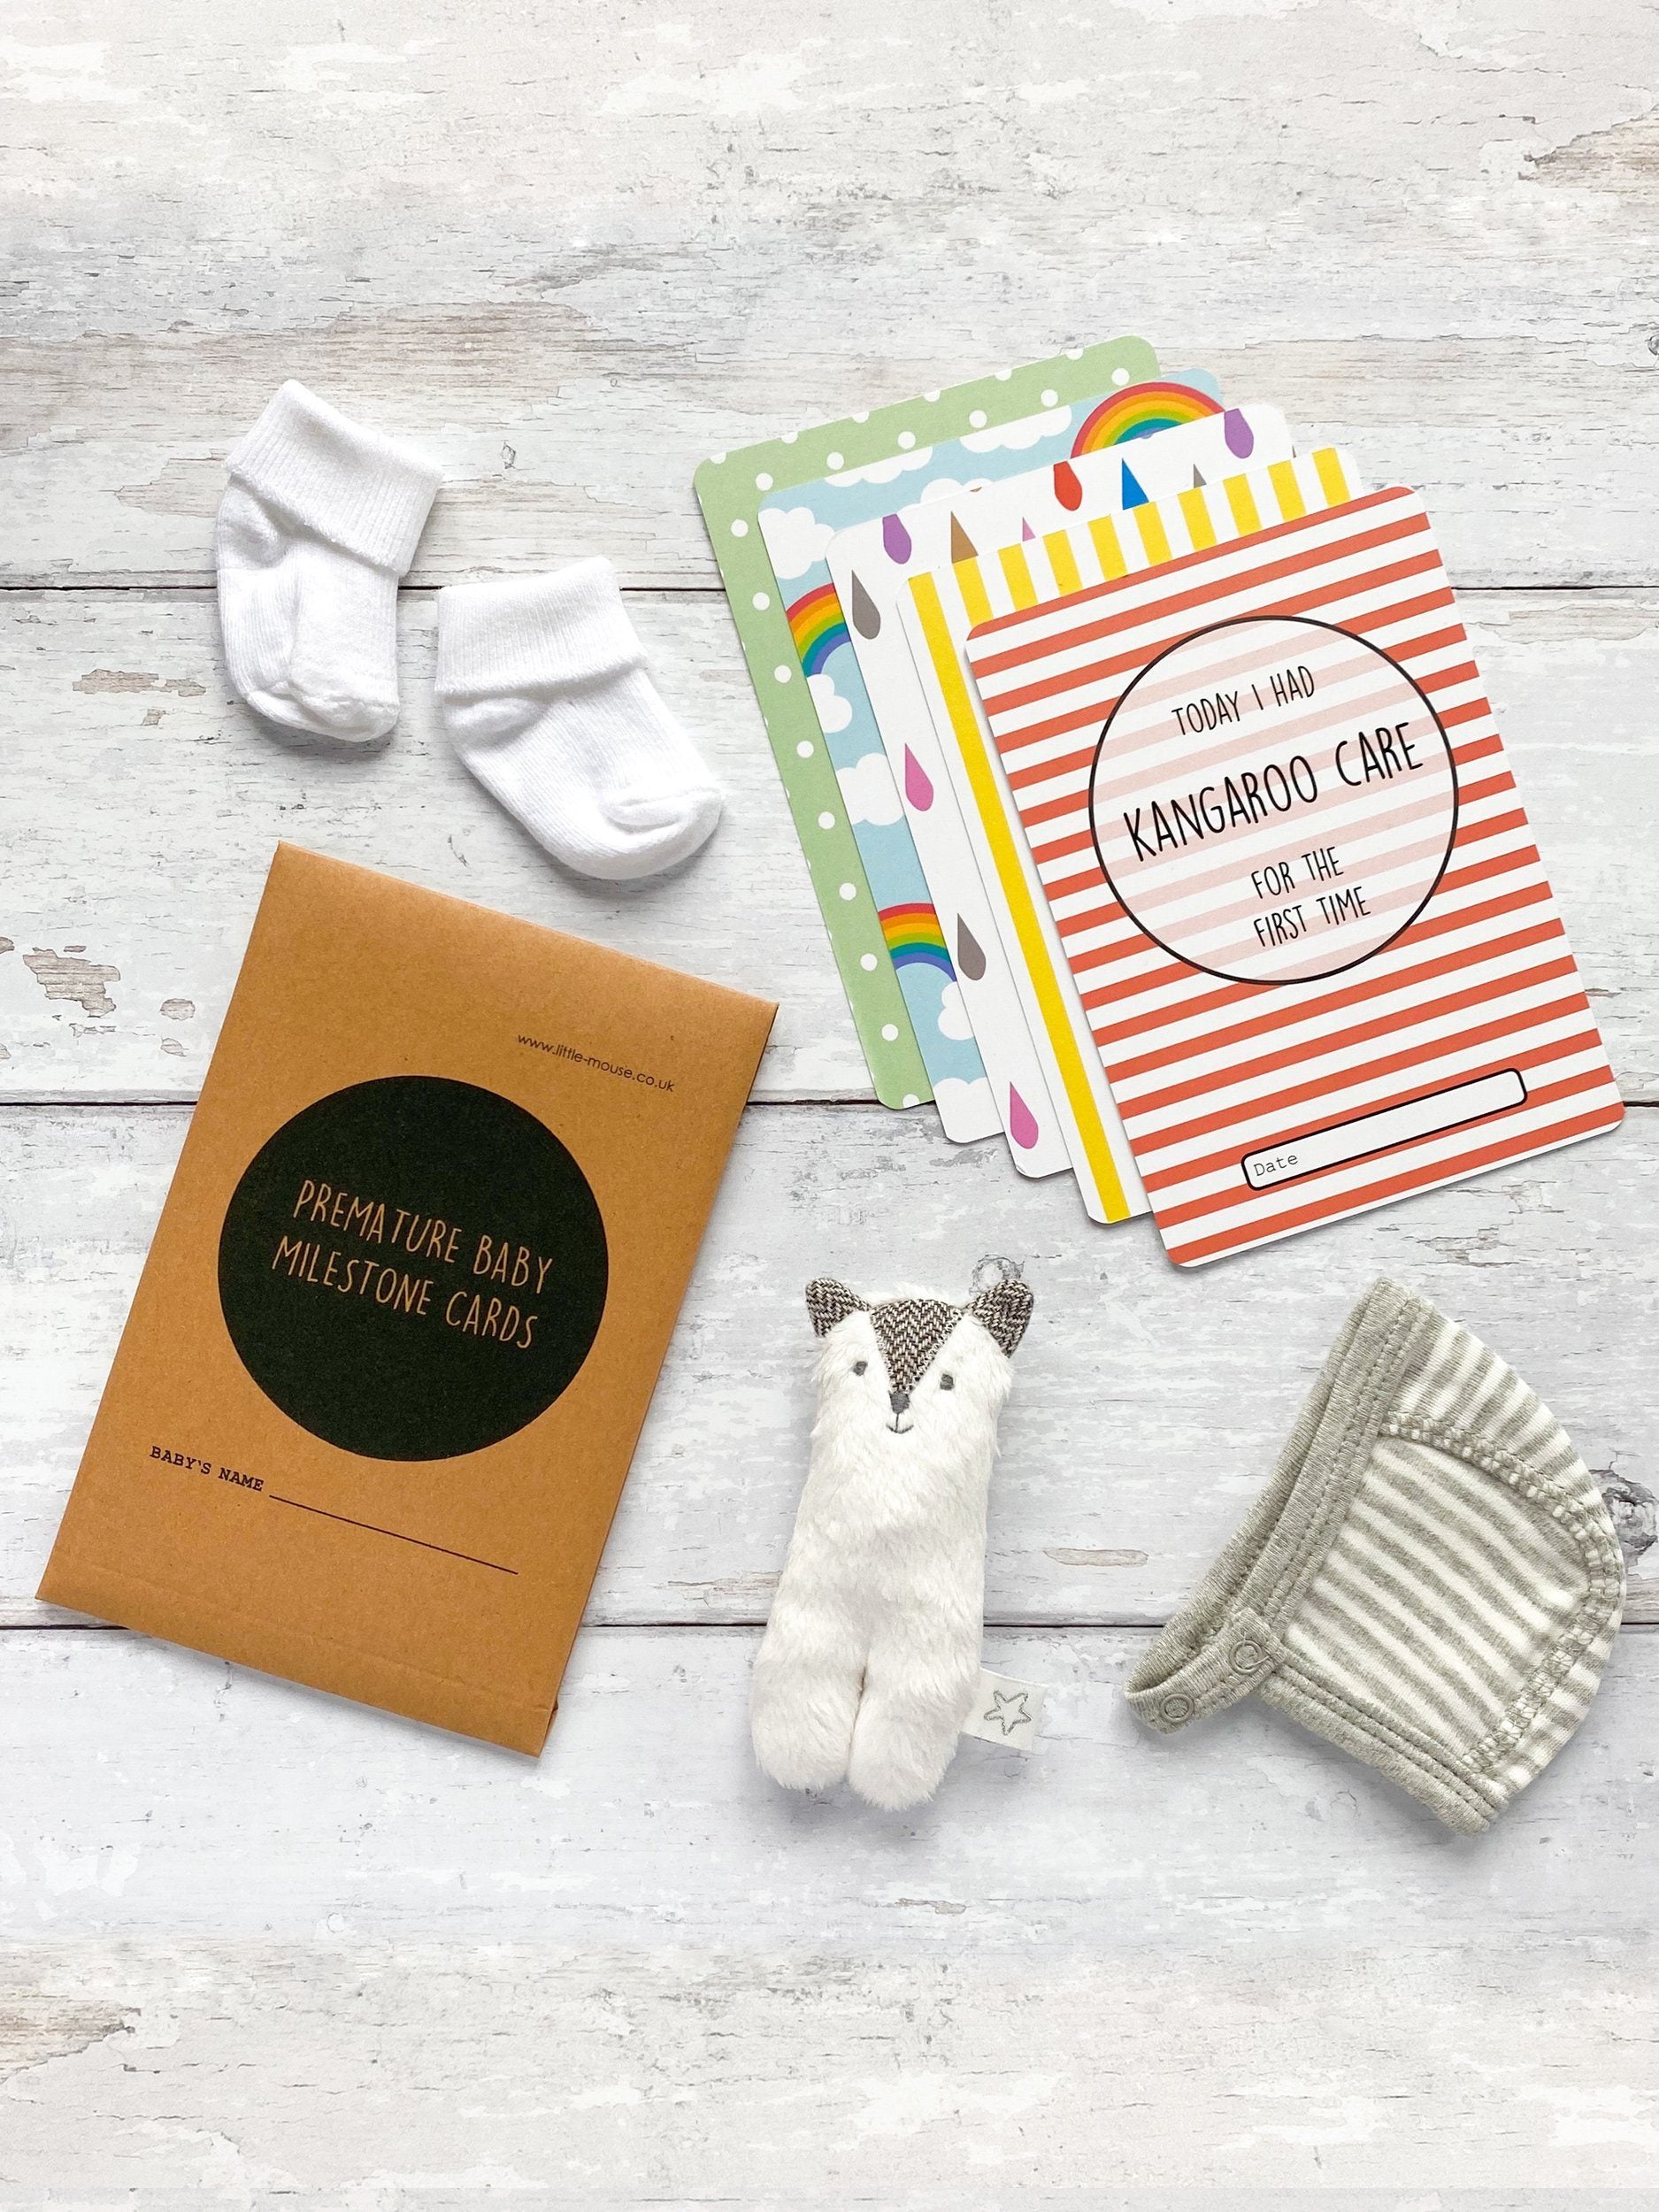 Premature Baby Milestone Cards - £2 Goes To Tommy’s - Milestone cards - Little Mouse Baby Clothing & Gifts